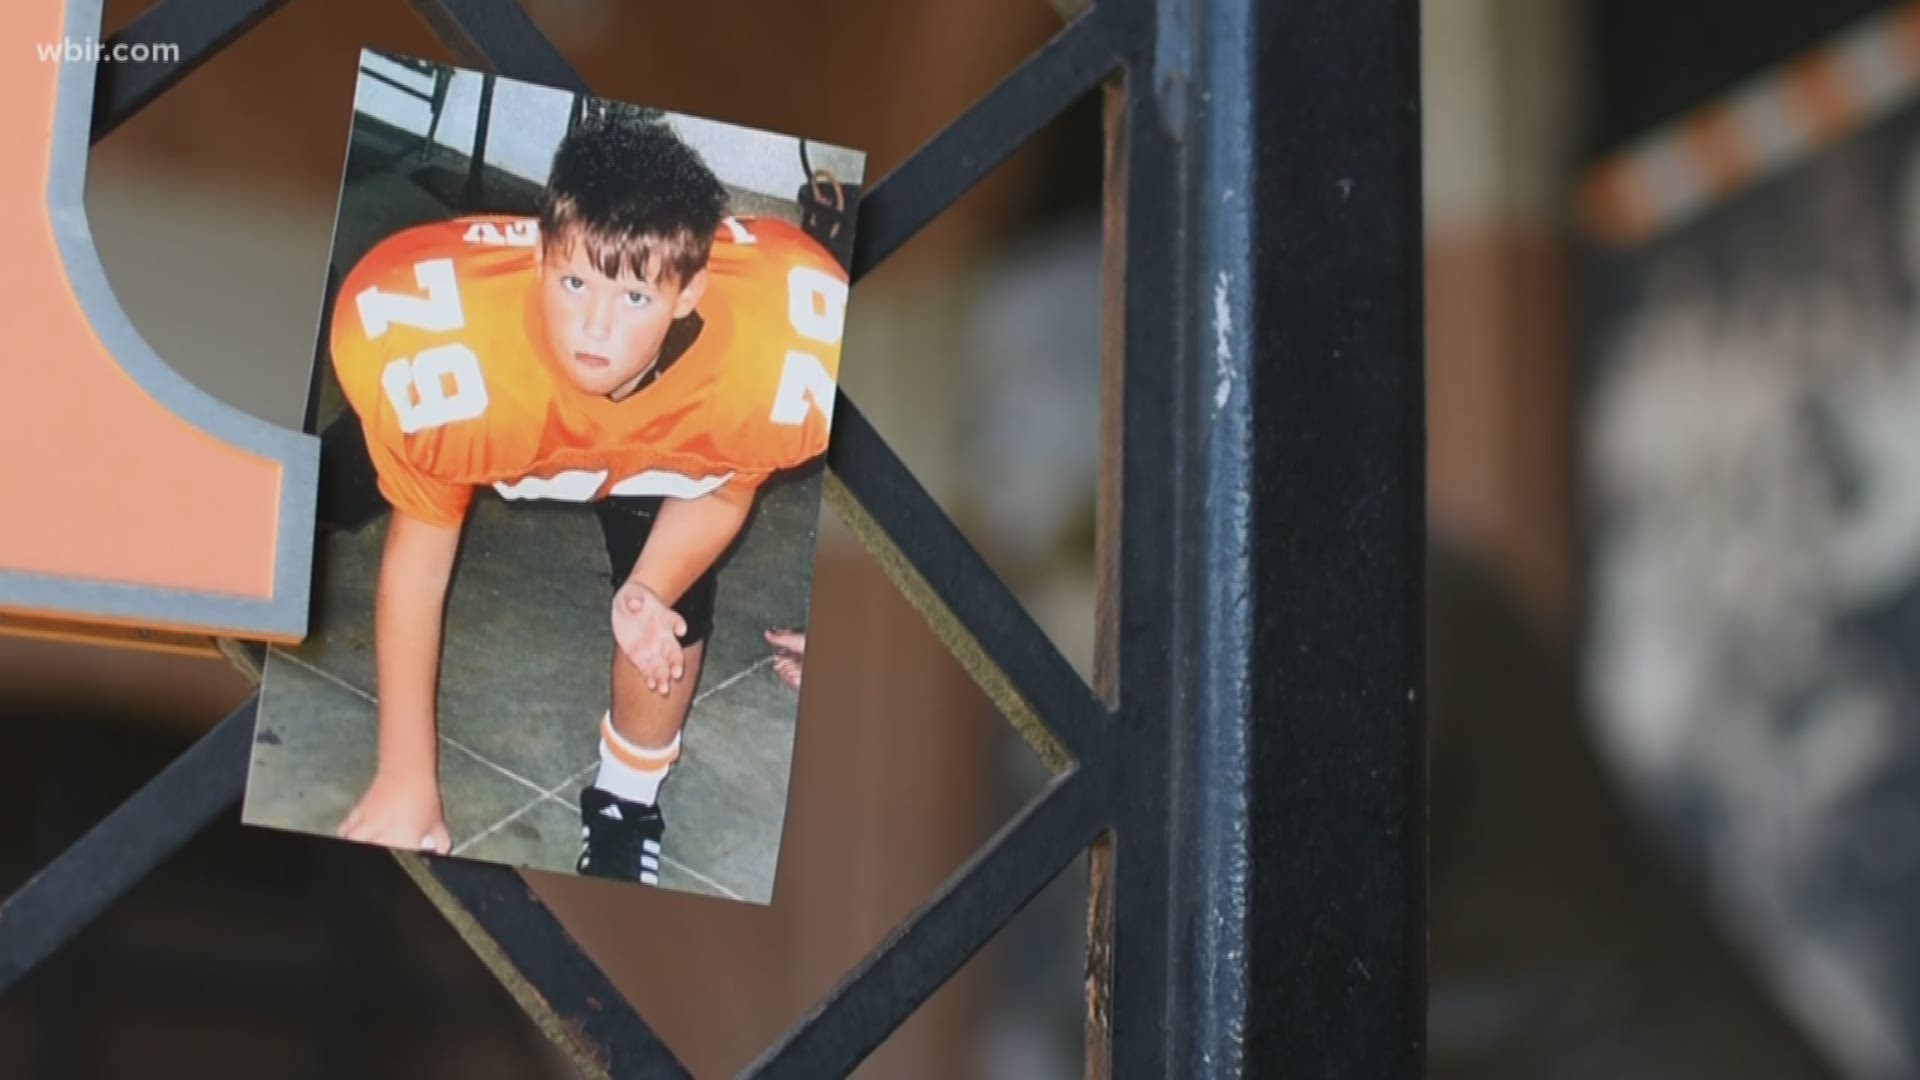 Four-star offensive lineman Jackson Lampley wants to help Jeremy Pruitt get the Vols back to the glory days of the '90s when his dad blocked for Peyton Manning at Tennessee.